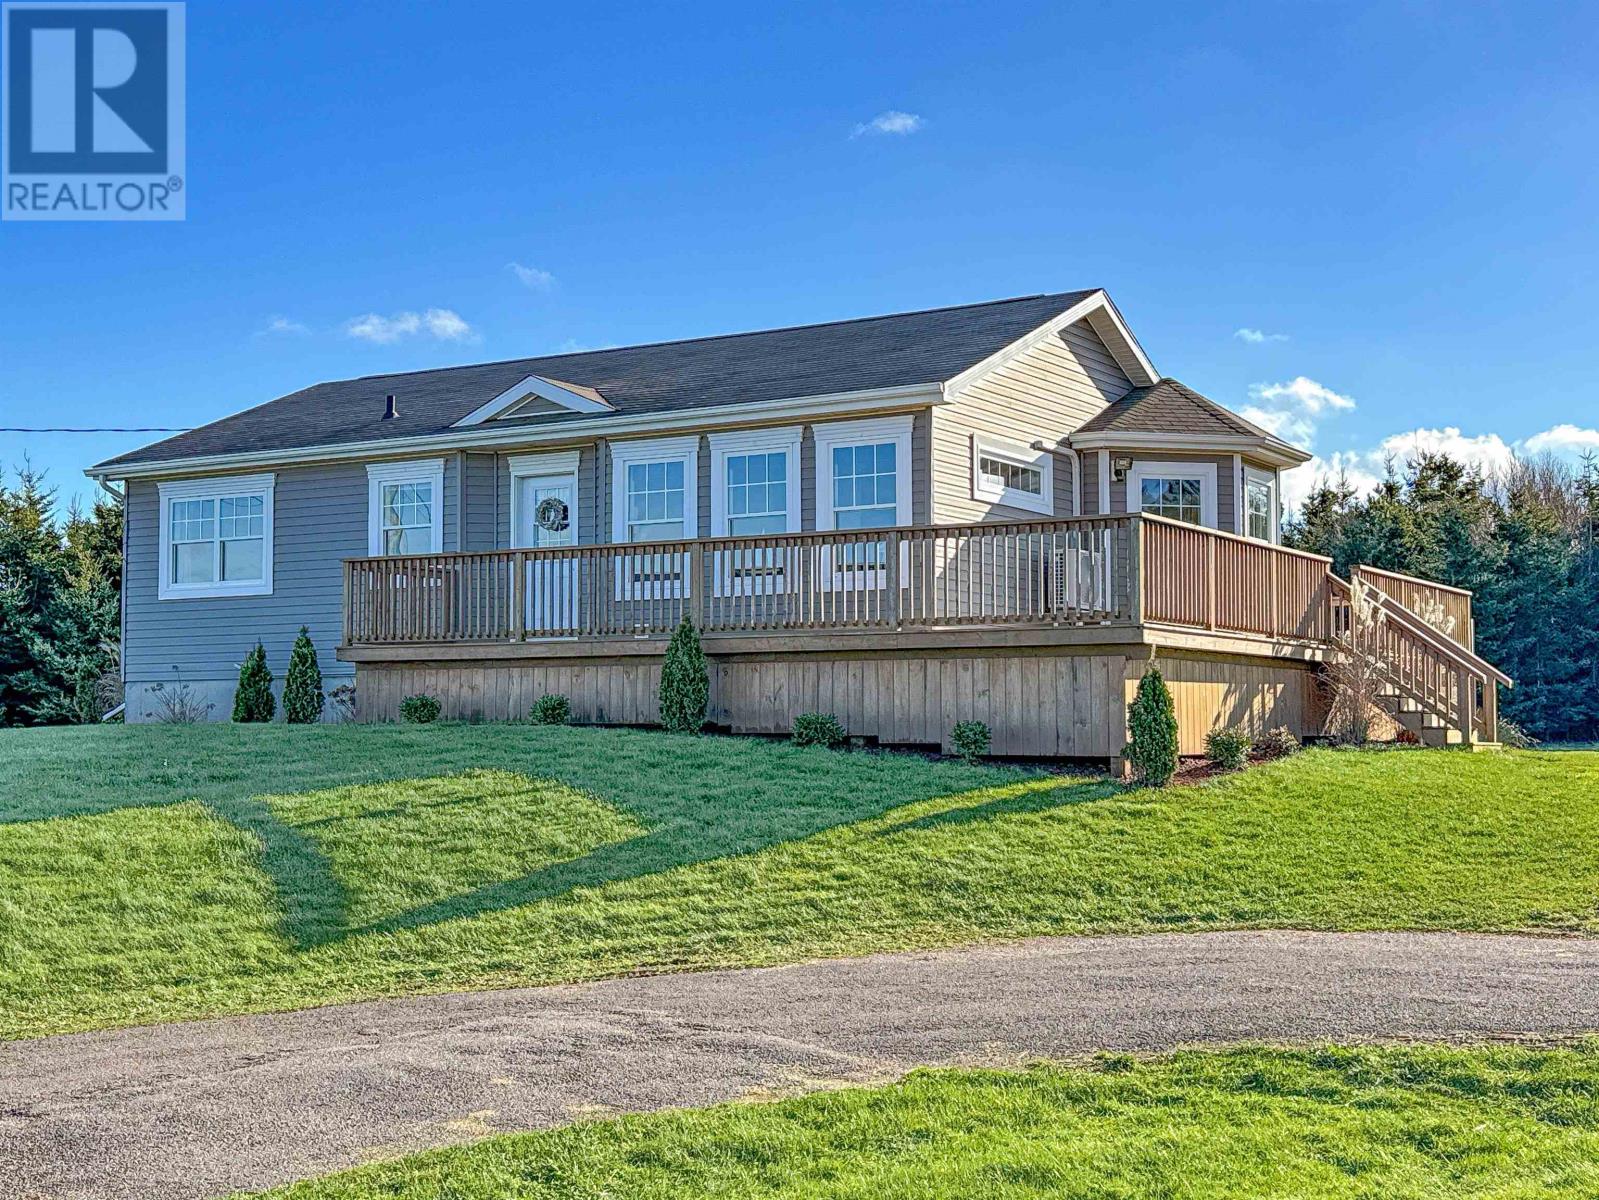 475 Lakeside Road475 Lakeside Road, Lakeside, Prince Edward Island C0A1S0, 4 Bedrooms Bedrooms, ,2 BathroomsBathrooms,Single Family,For Sale,475 Lakeside Road,202324844